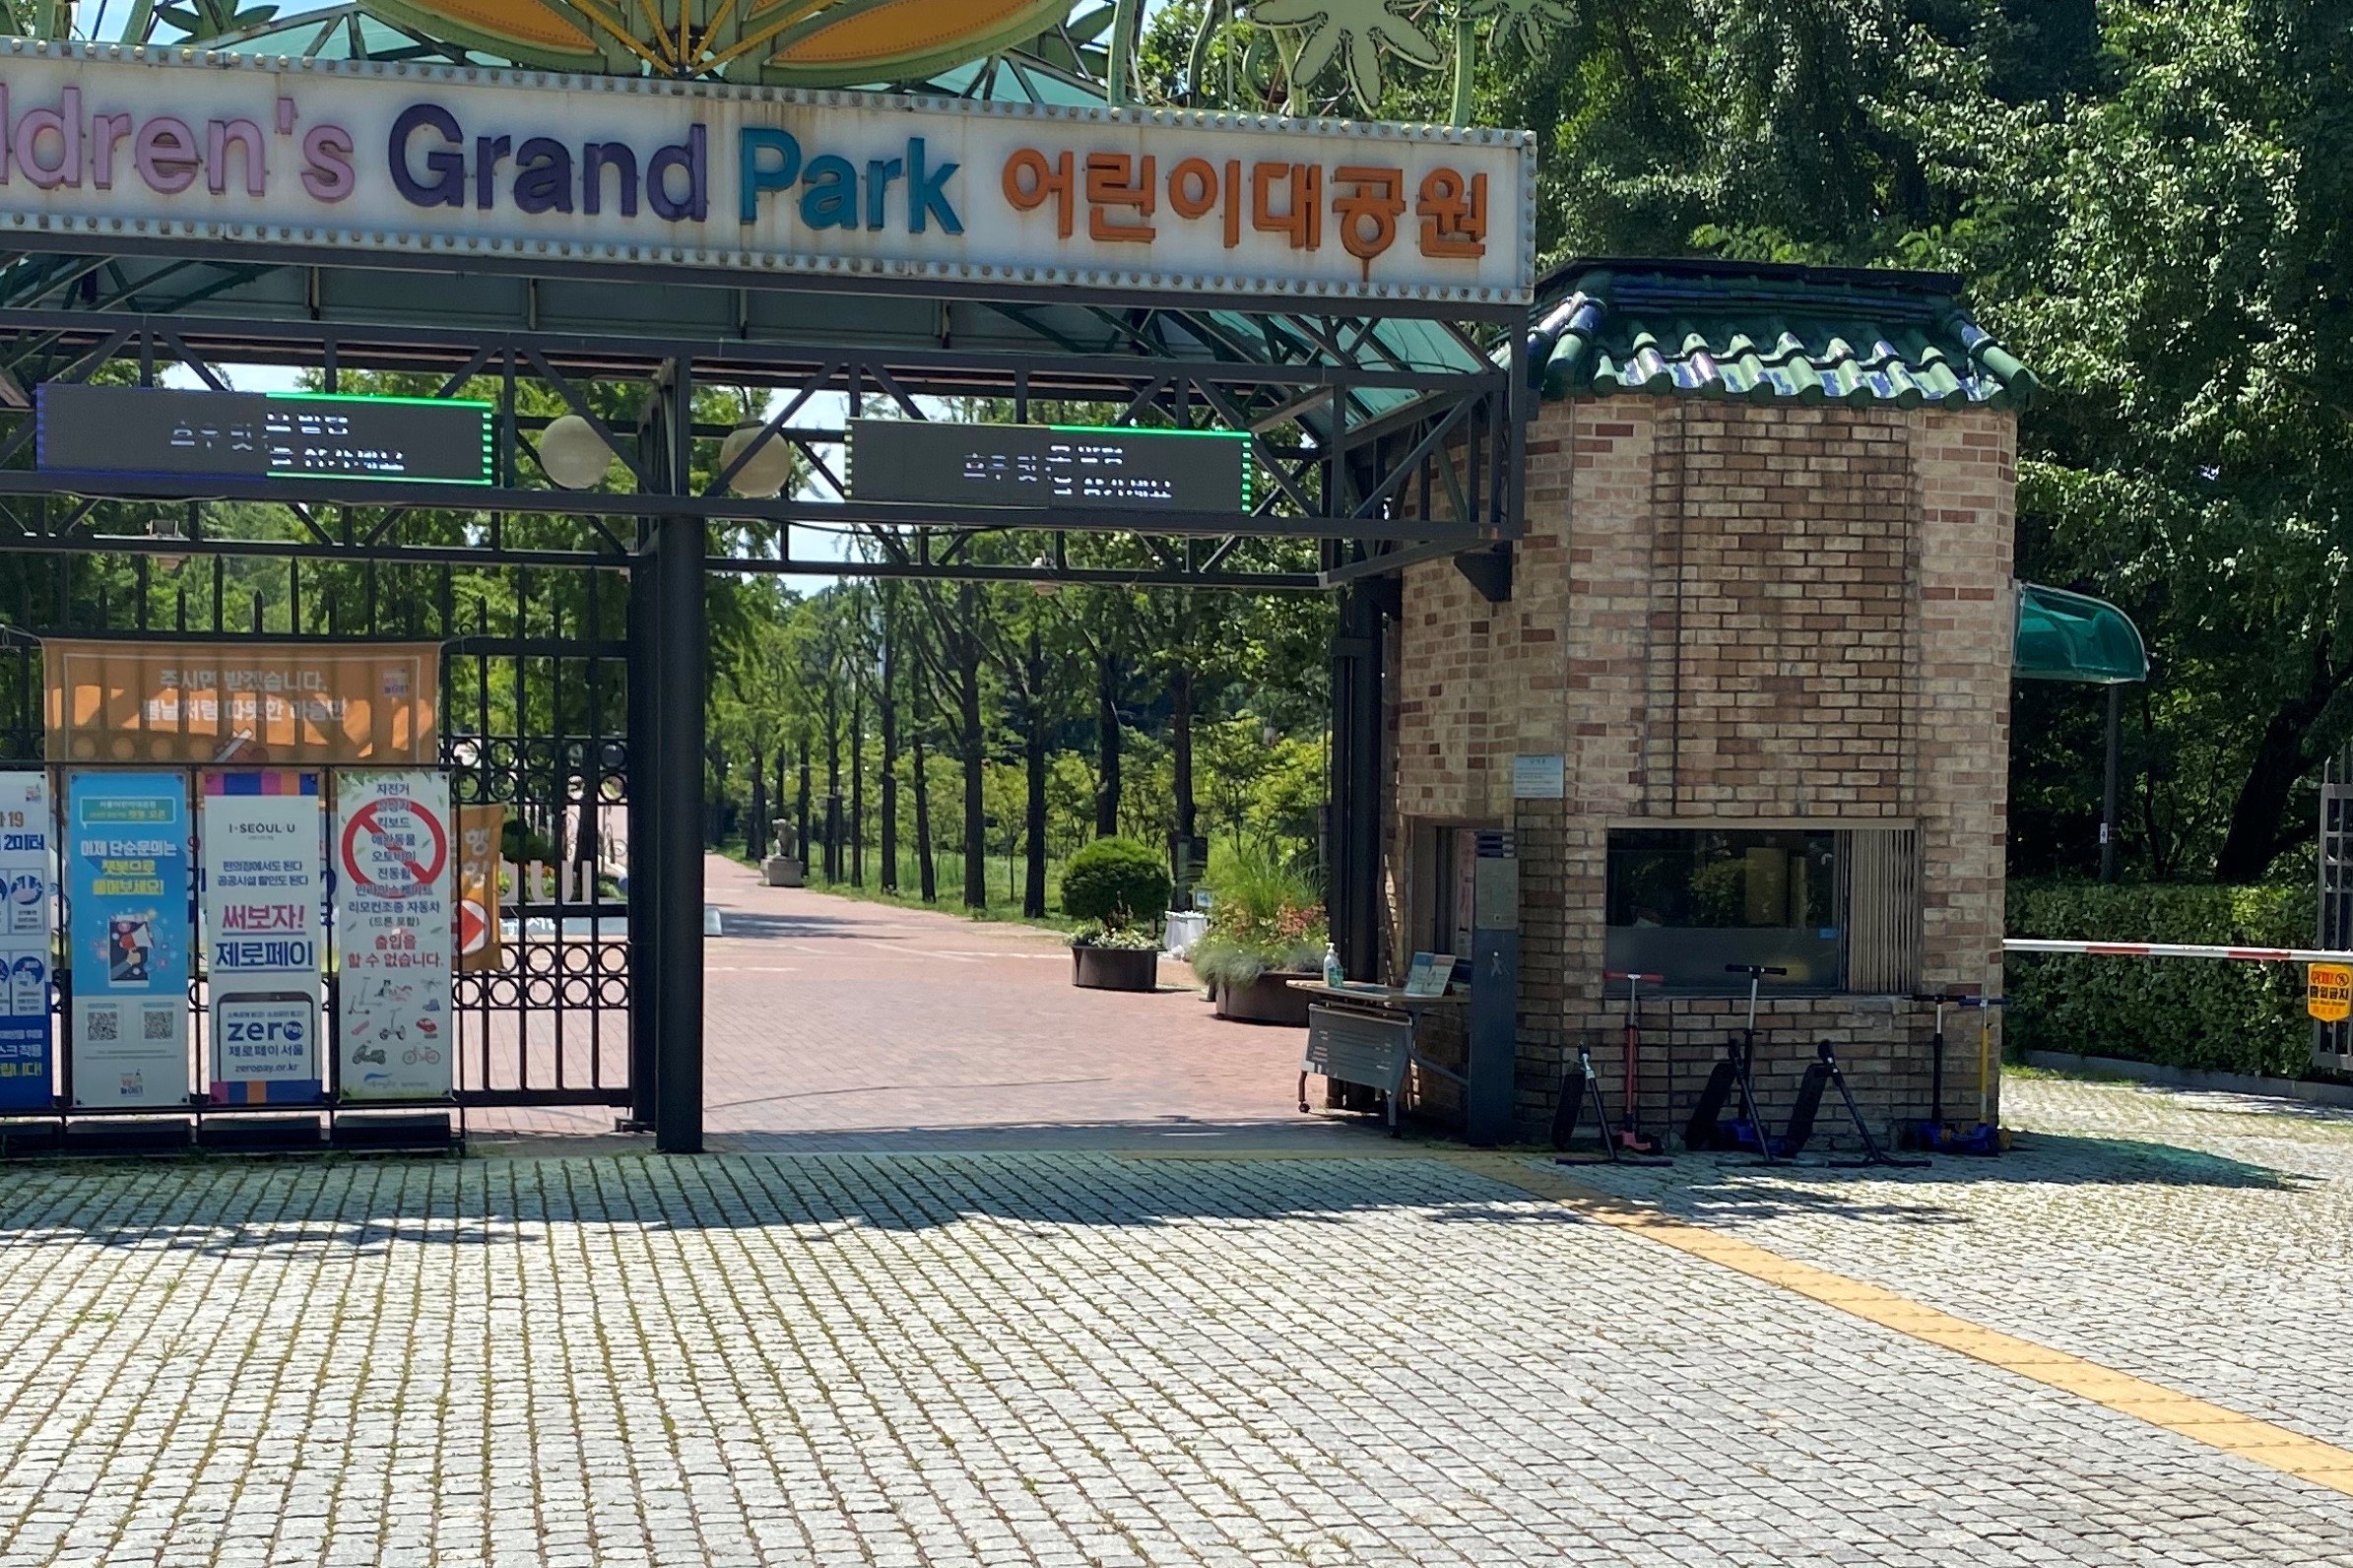 Entryway and Main entrance0 : Main entrance of Seoul Children's Grand Park